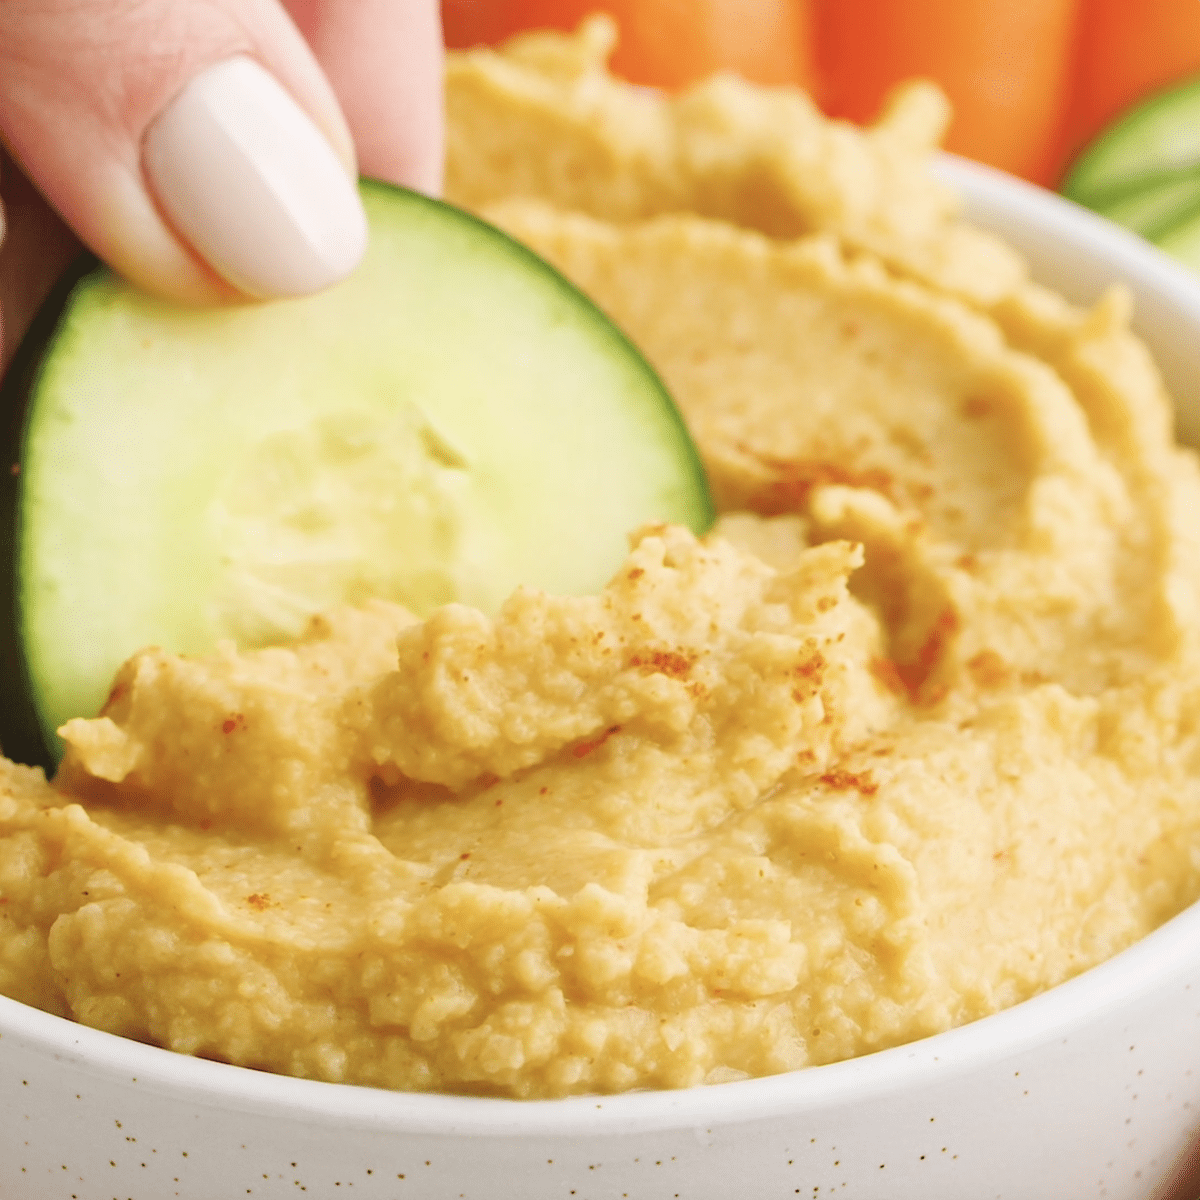 Hand holding sliced cucumber and dipping it into a bowl of homemade hummus